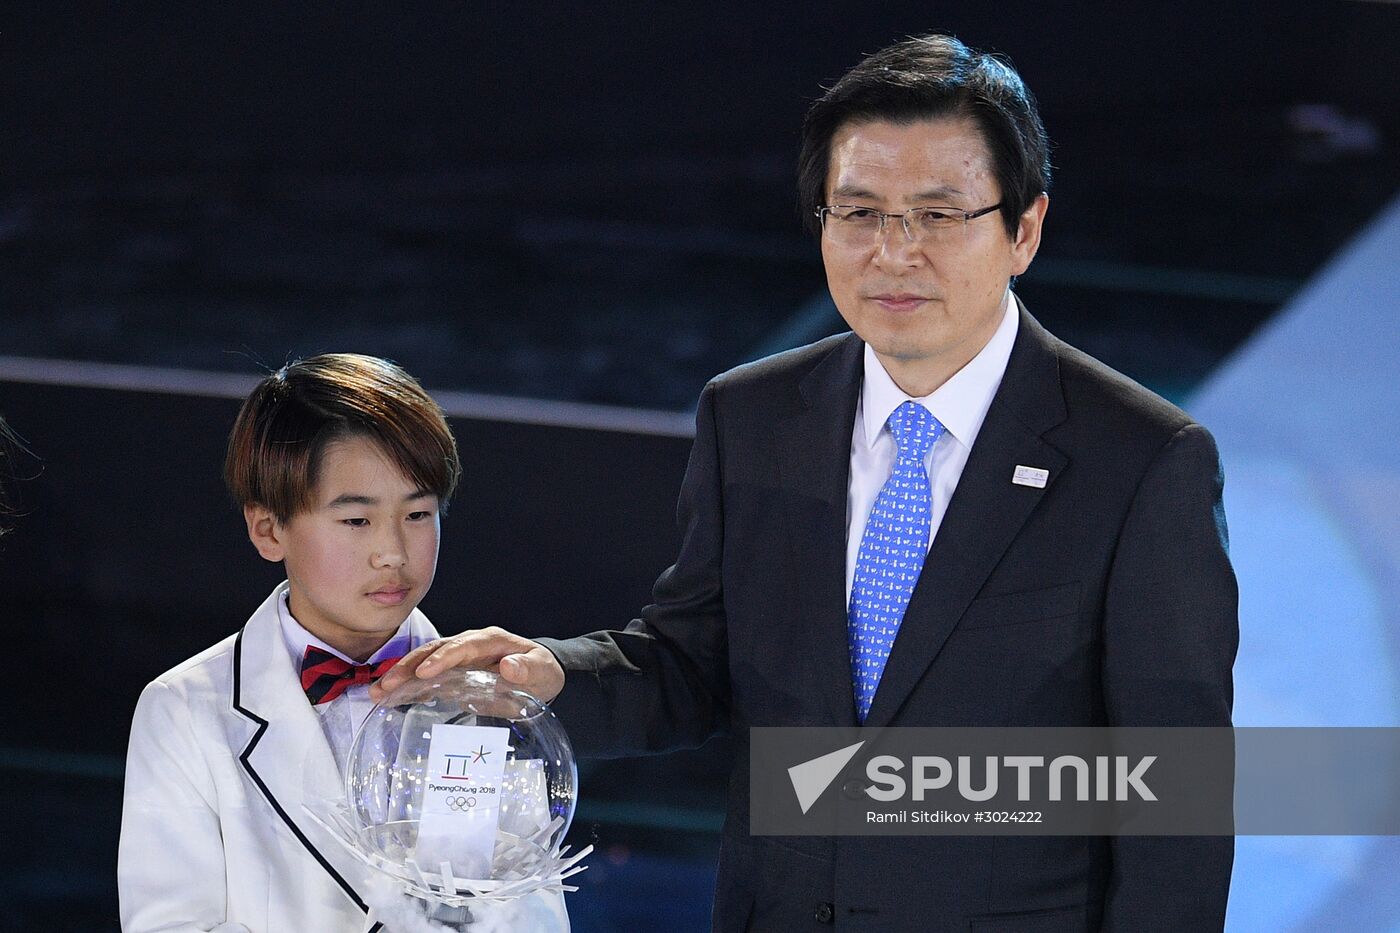 PyeongChang 2018 One Year to Go Ceremony